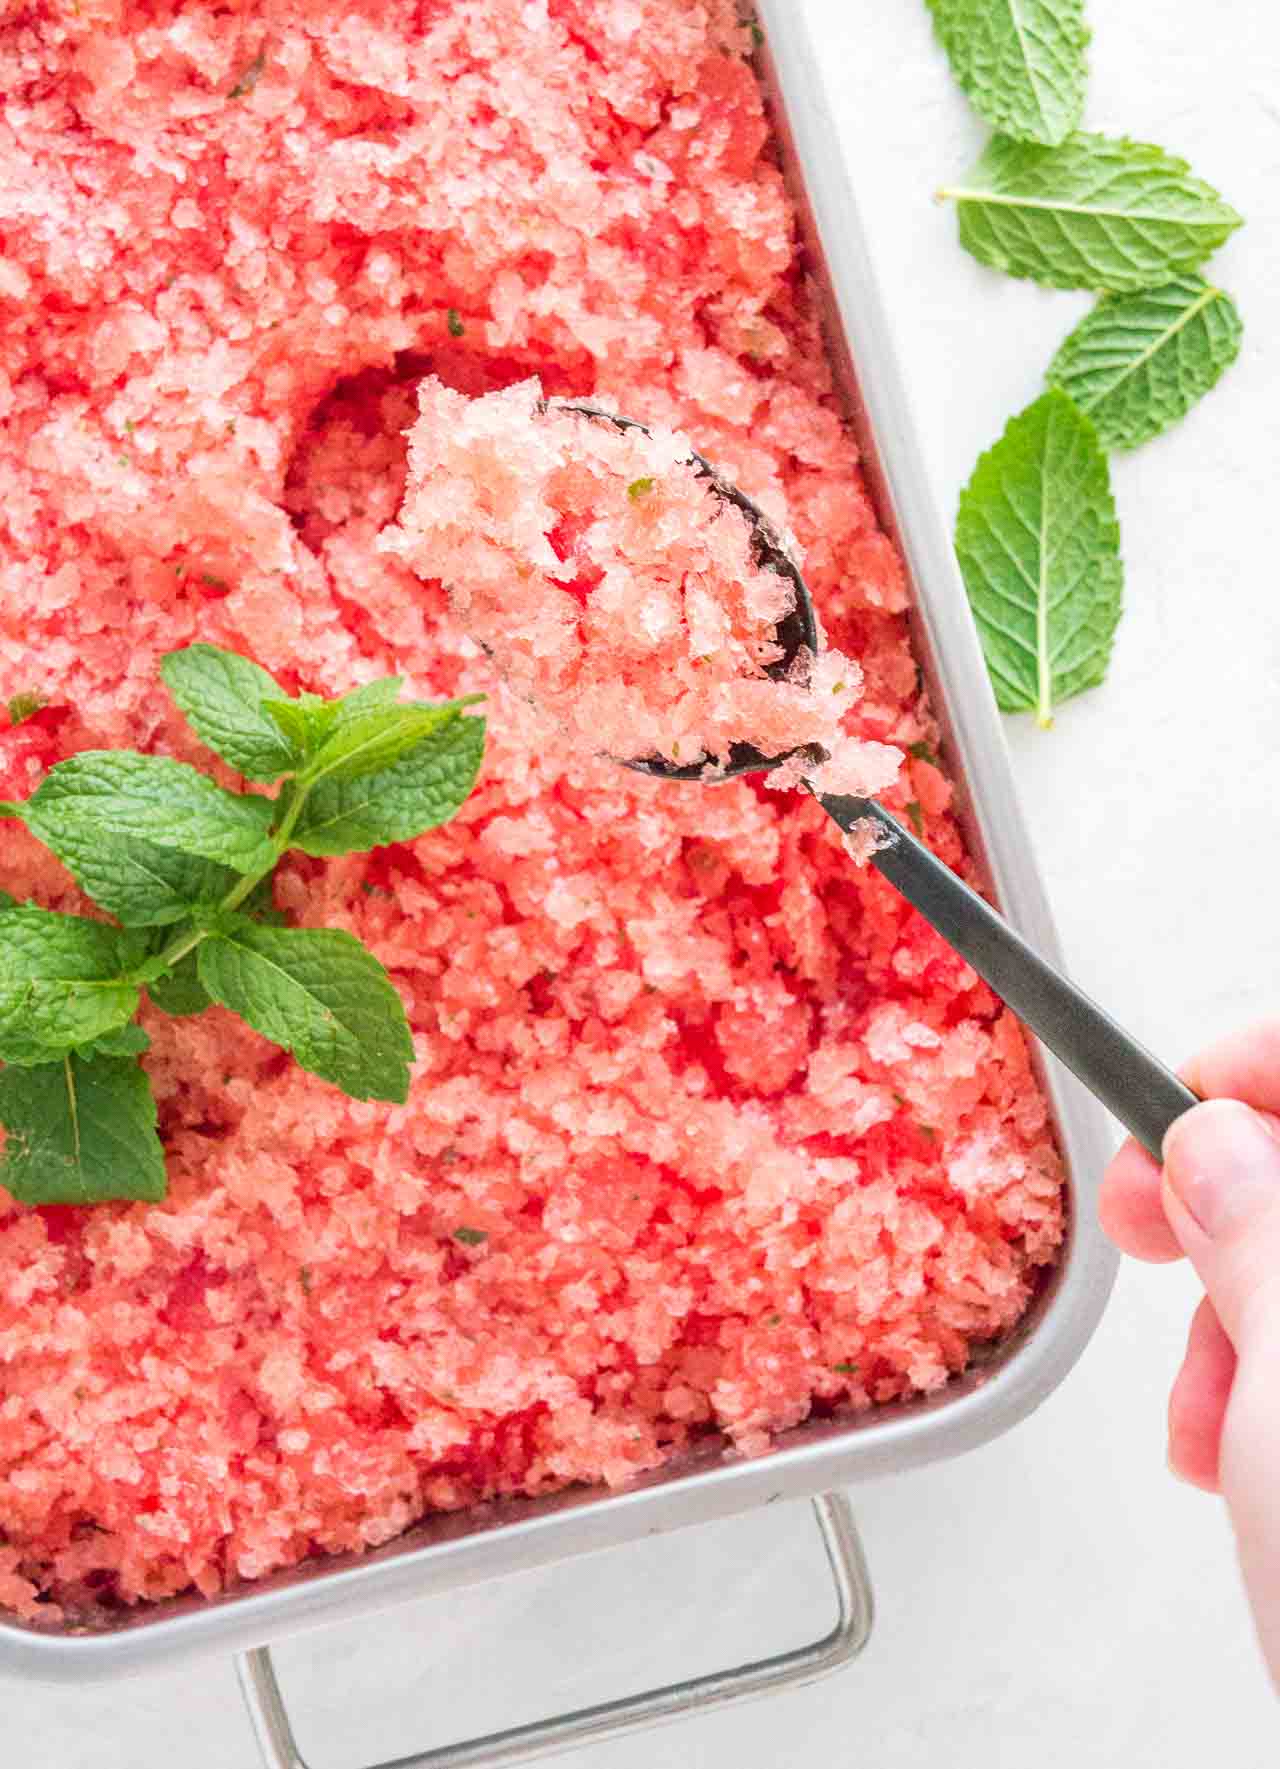 A stainless steel baking pan of pink watermelon granita garnished with mint. A hand is digging into the granita with a spoon.